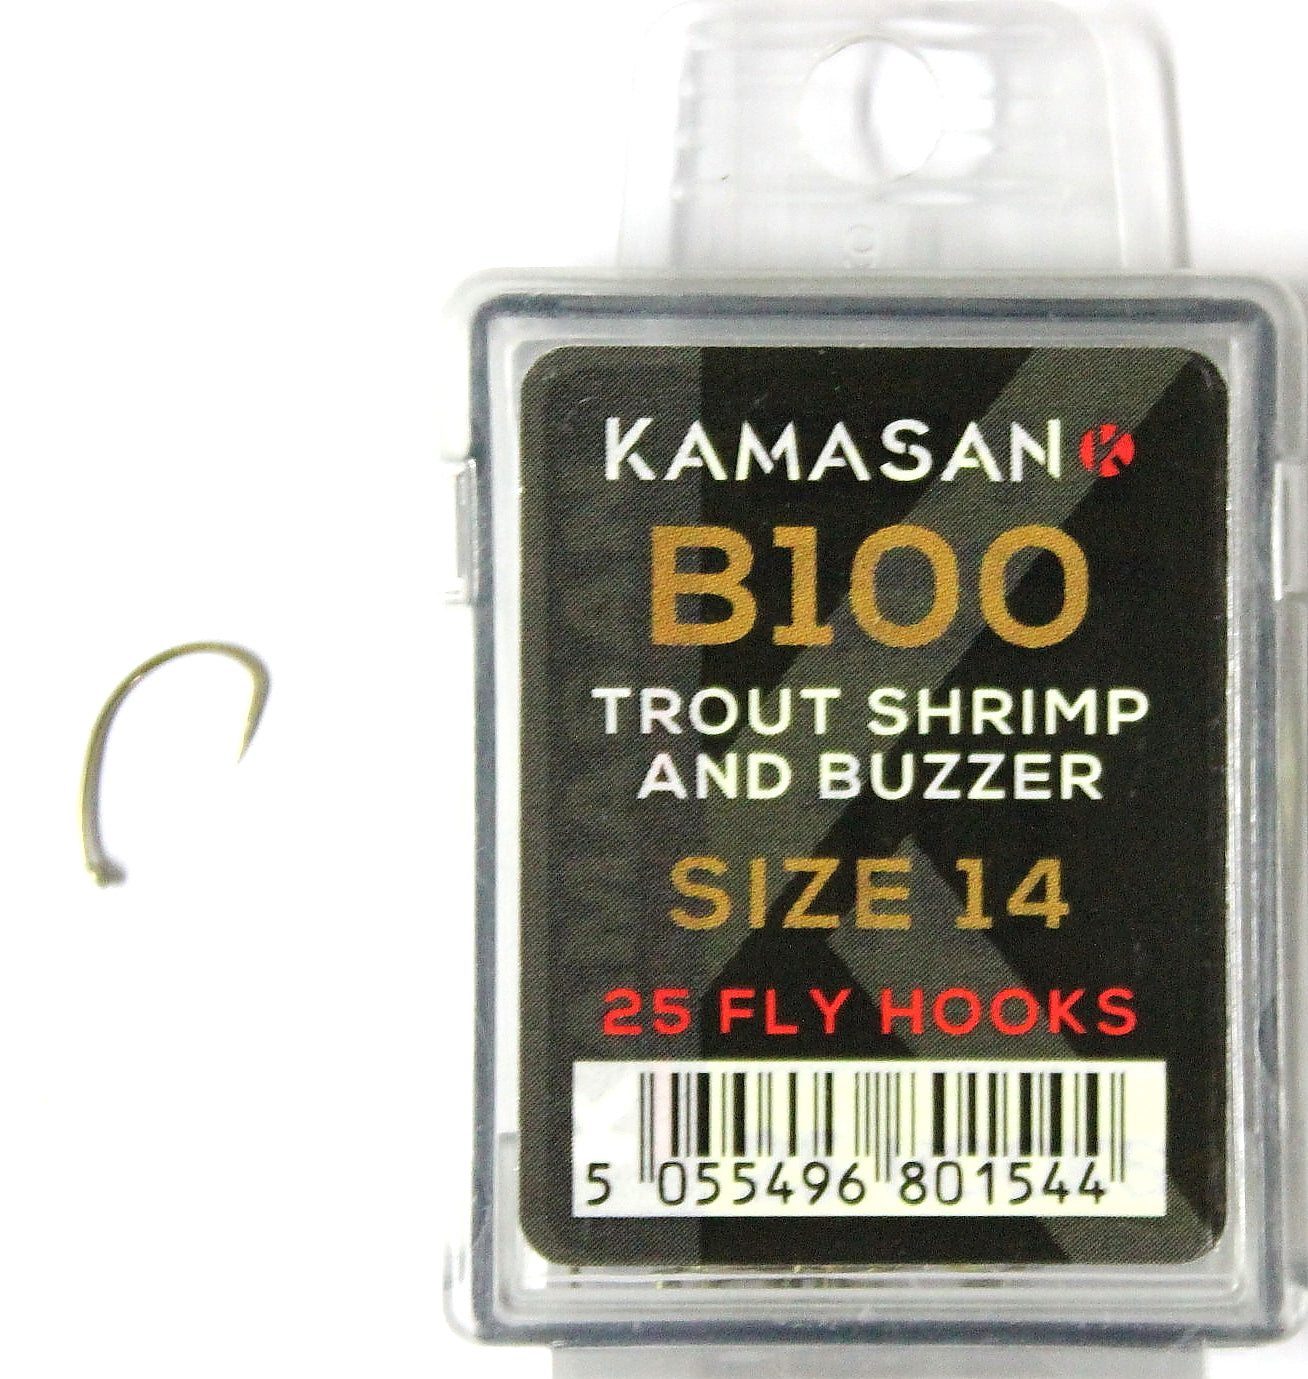 Kamasan Fly Hooks B100 size 16 Qty 25 for Trout, Shrimp and Buzzer –  Ultimate Fishing and Outdoors